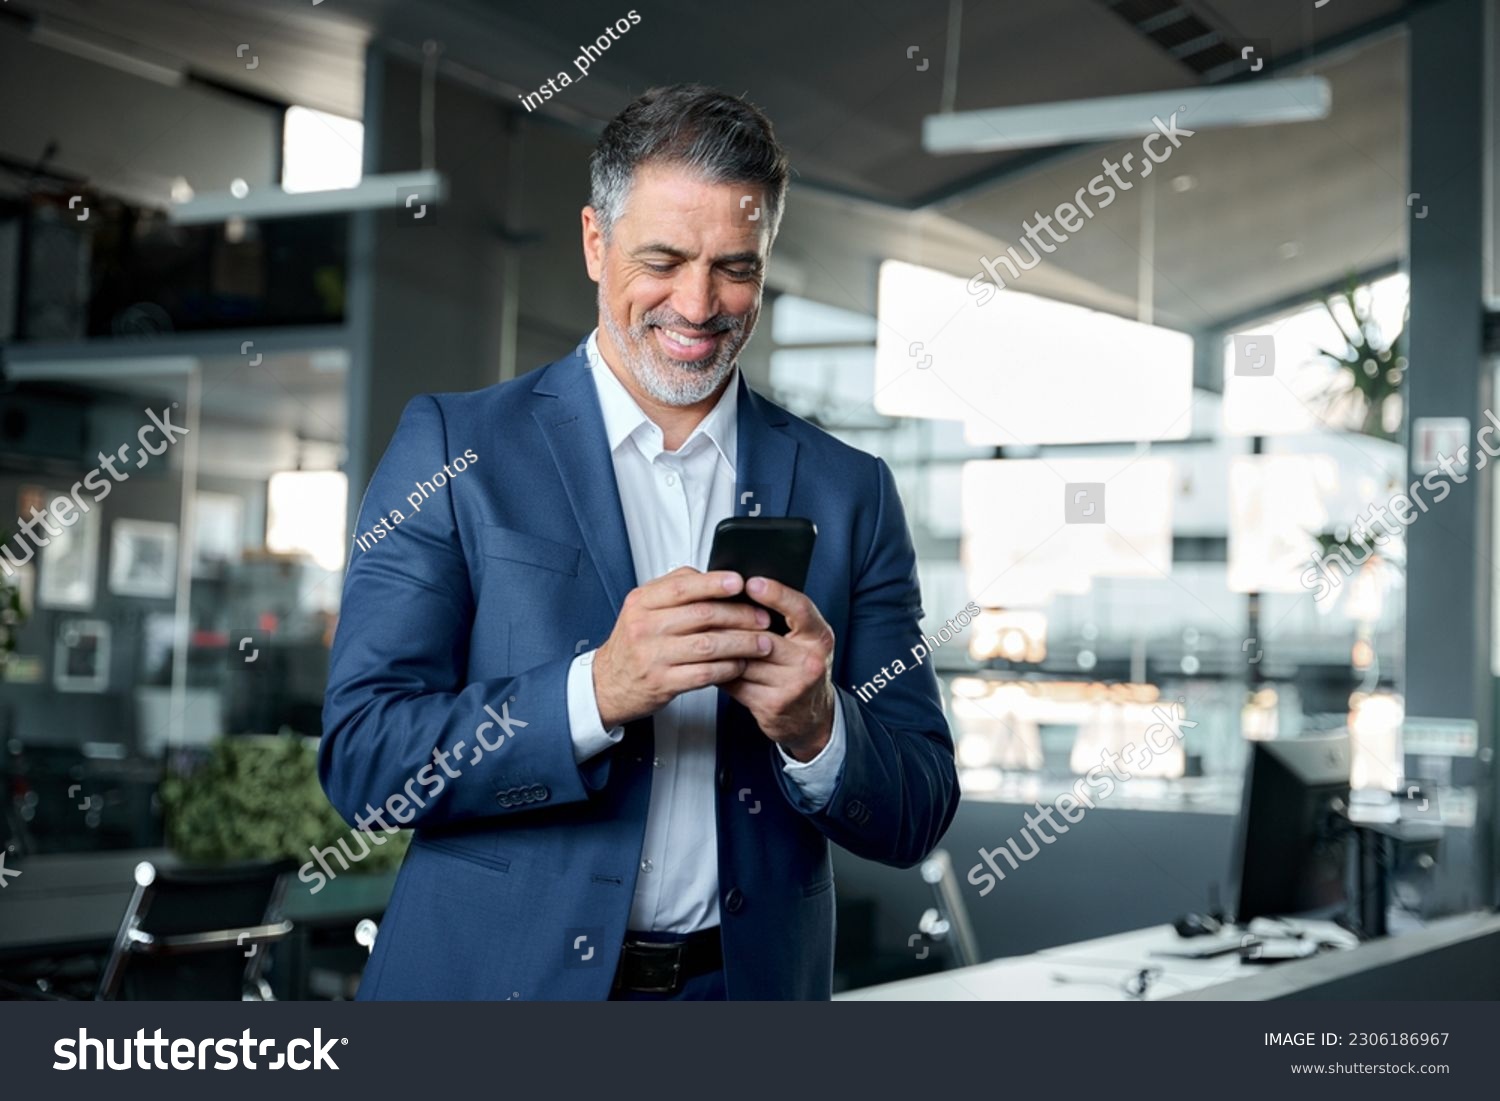 Happy middle-aged business man ceo wearing blue suit standing in office using cell phone. Older businessman professional executive holding mobile satisfied with enterprise solution management service. #2306186967